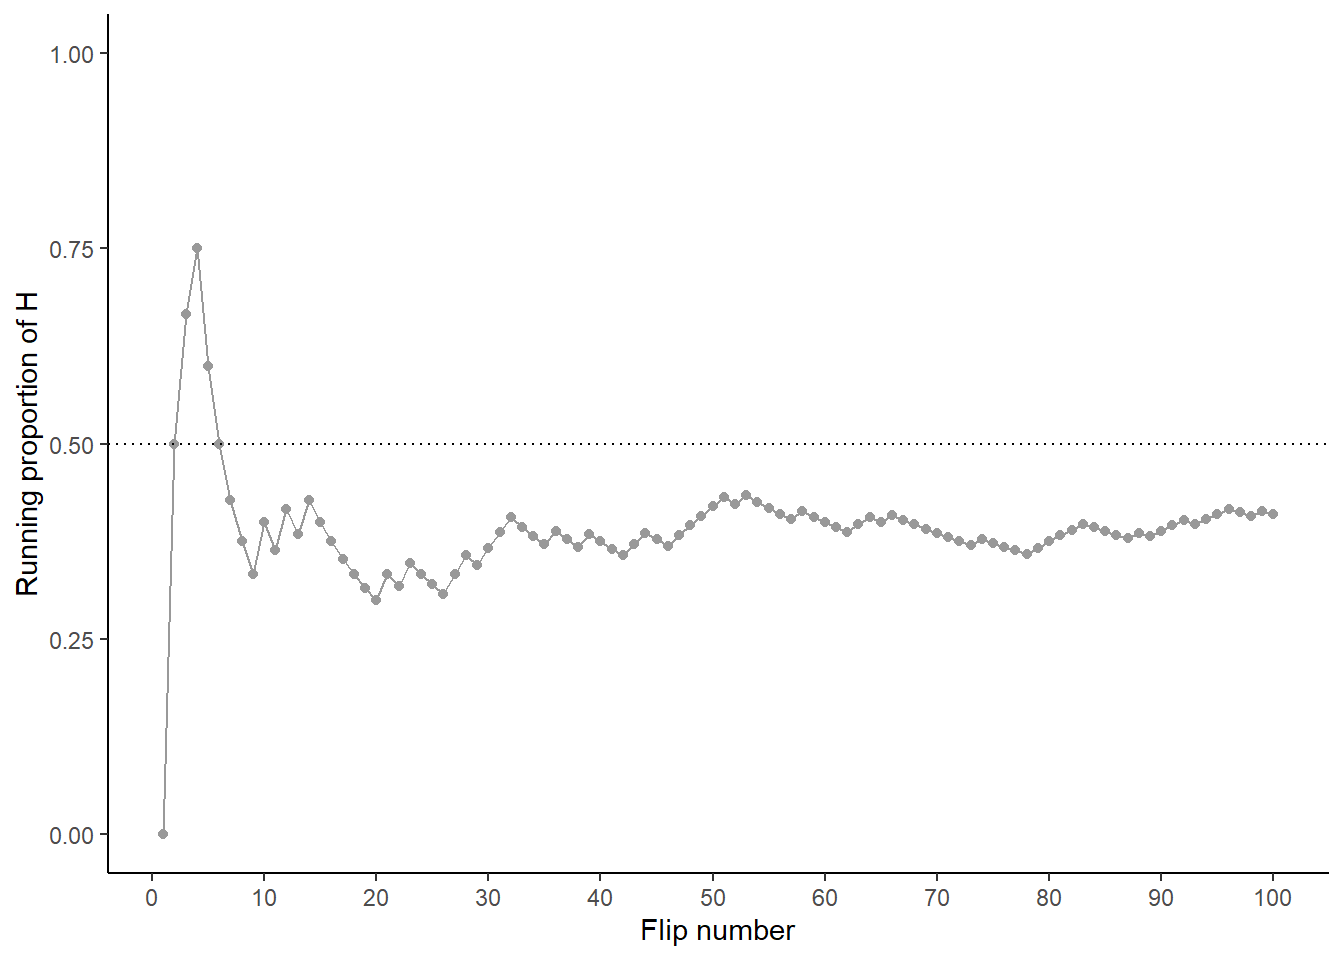 Running proportion of H versus number of flips for four sets of 100 coin flips.